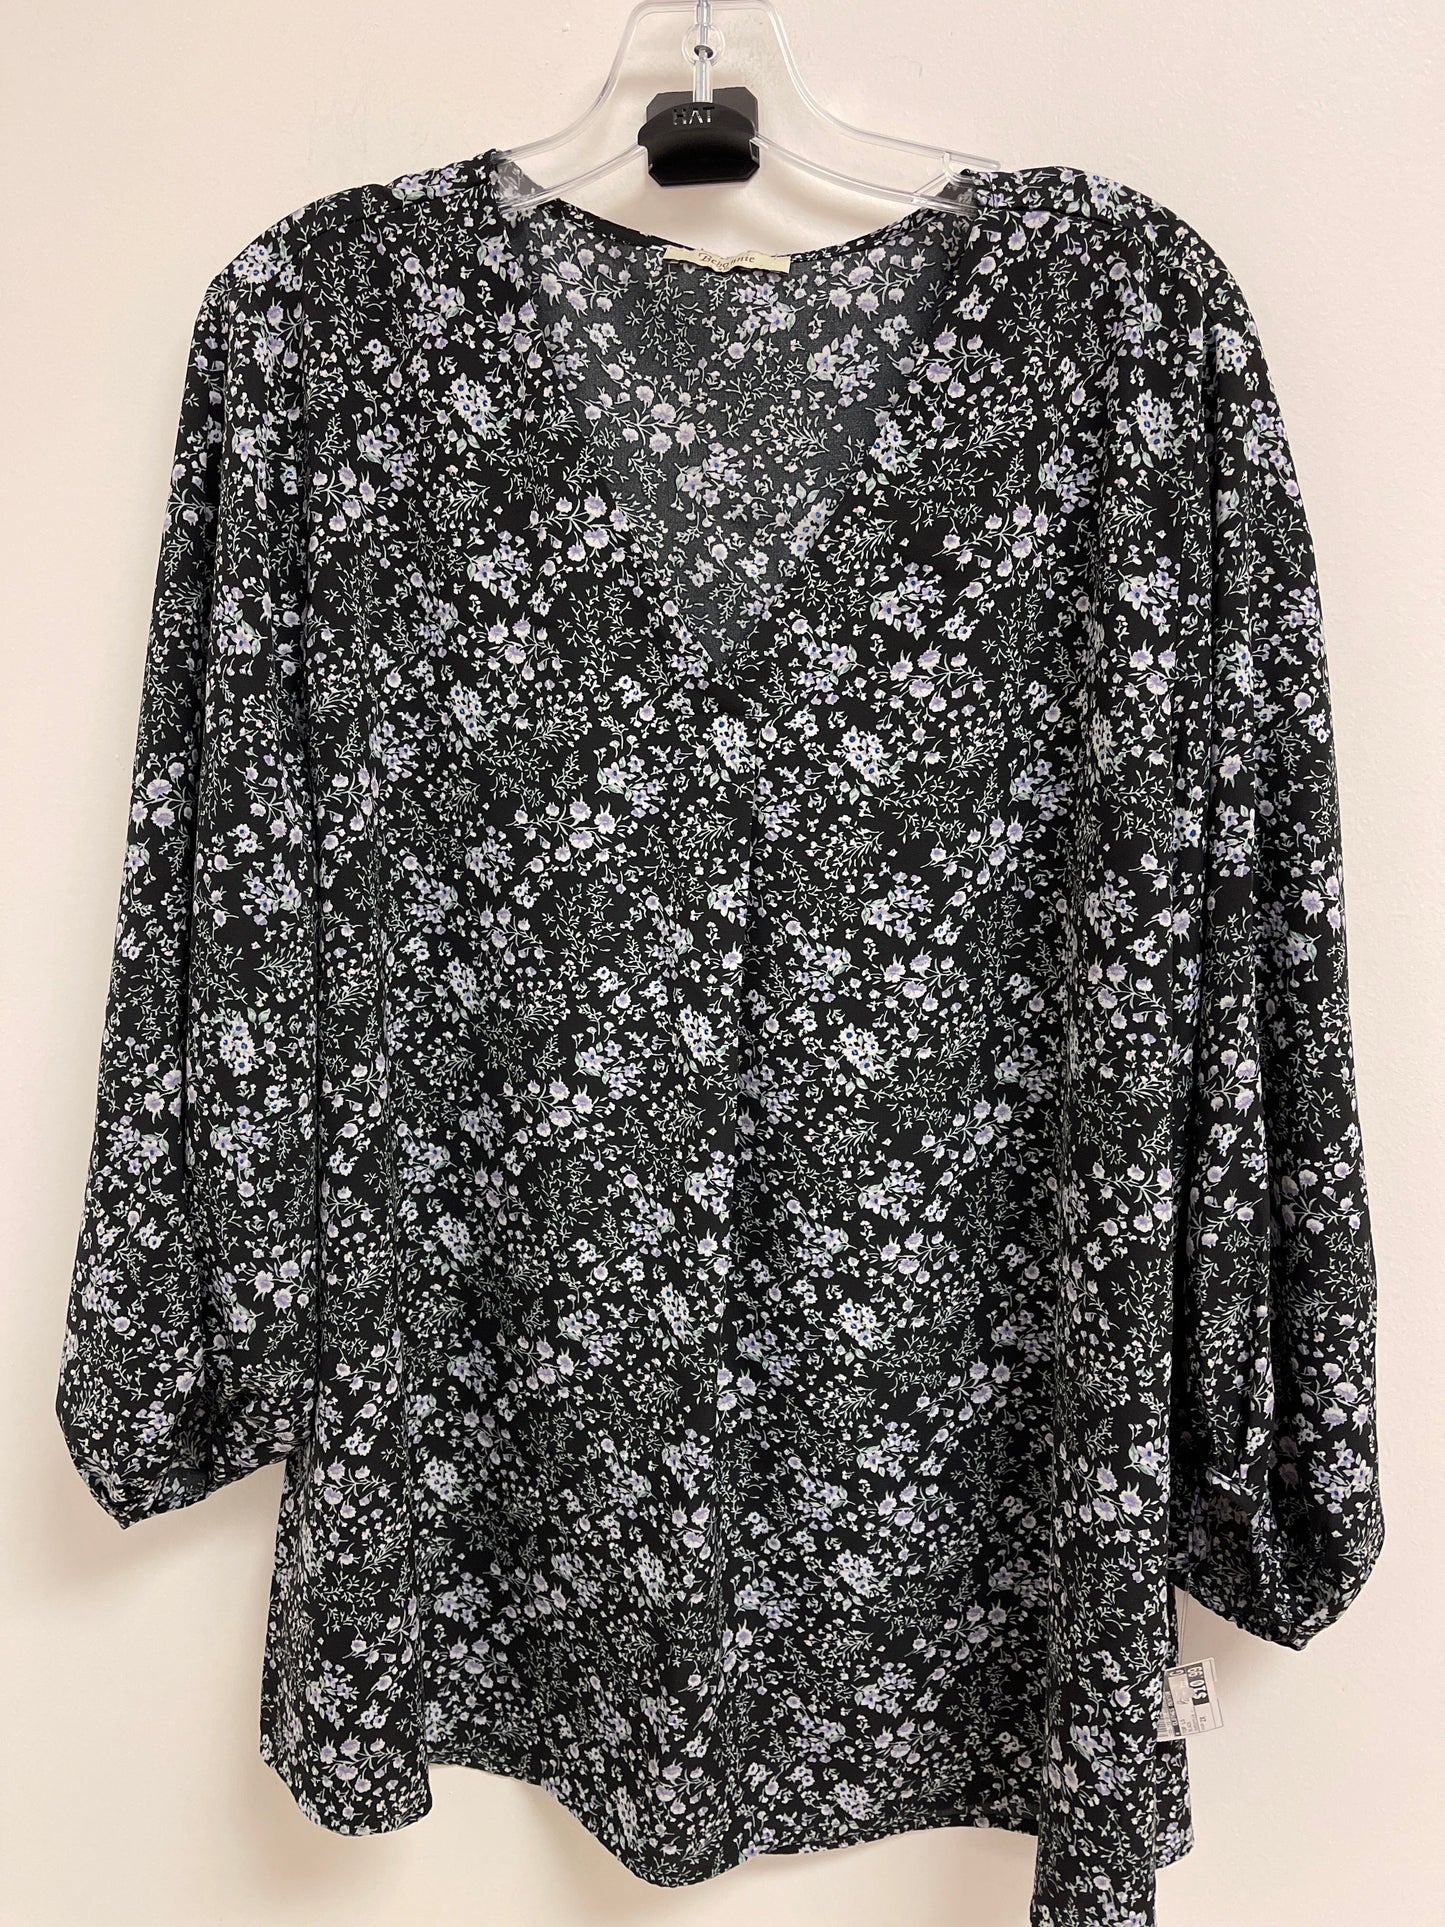 Black Top Long Sleeve Clothes Mentor, Size 2x